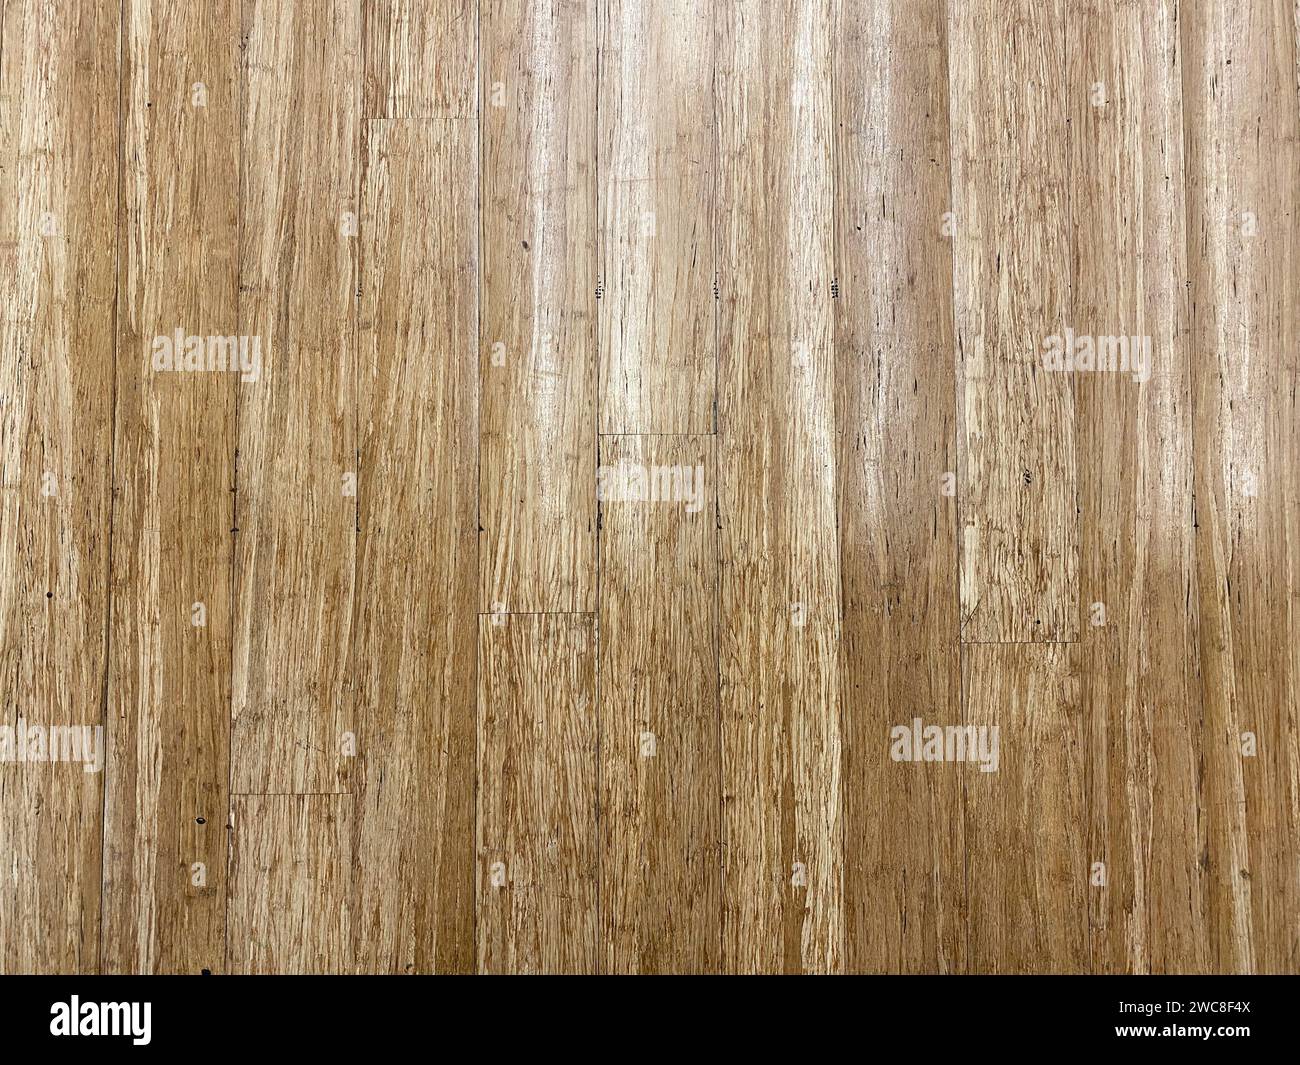 Horizontal wood paneling, creating a sense of space and openness in your design layout. Stock Photo